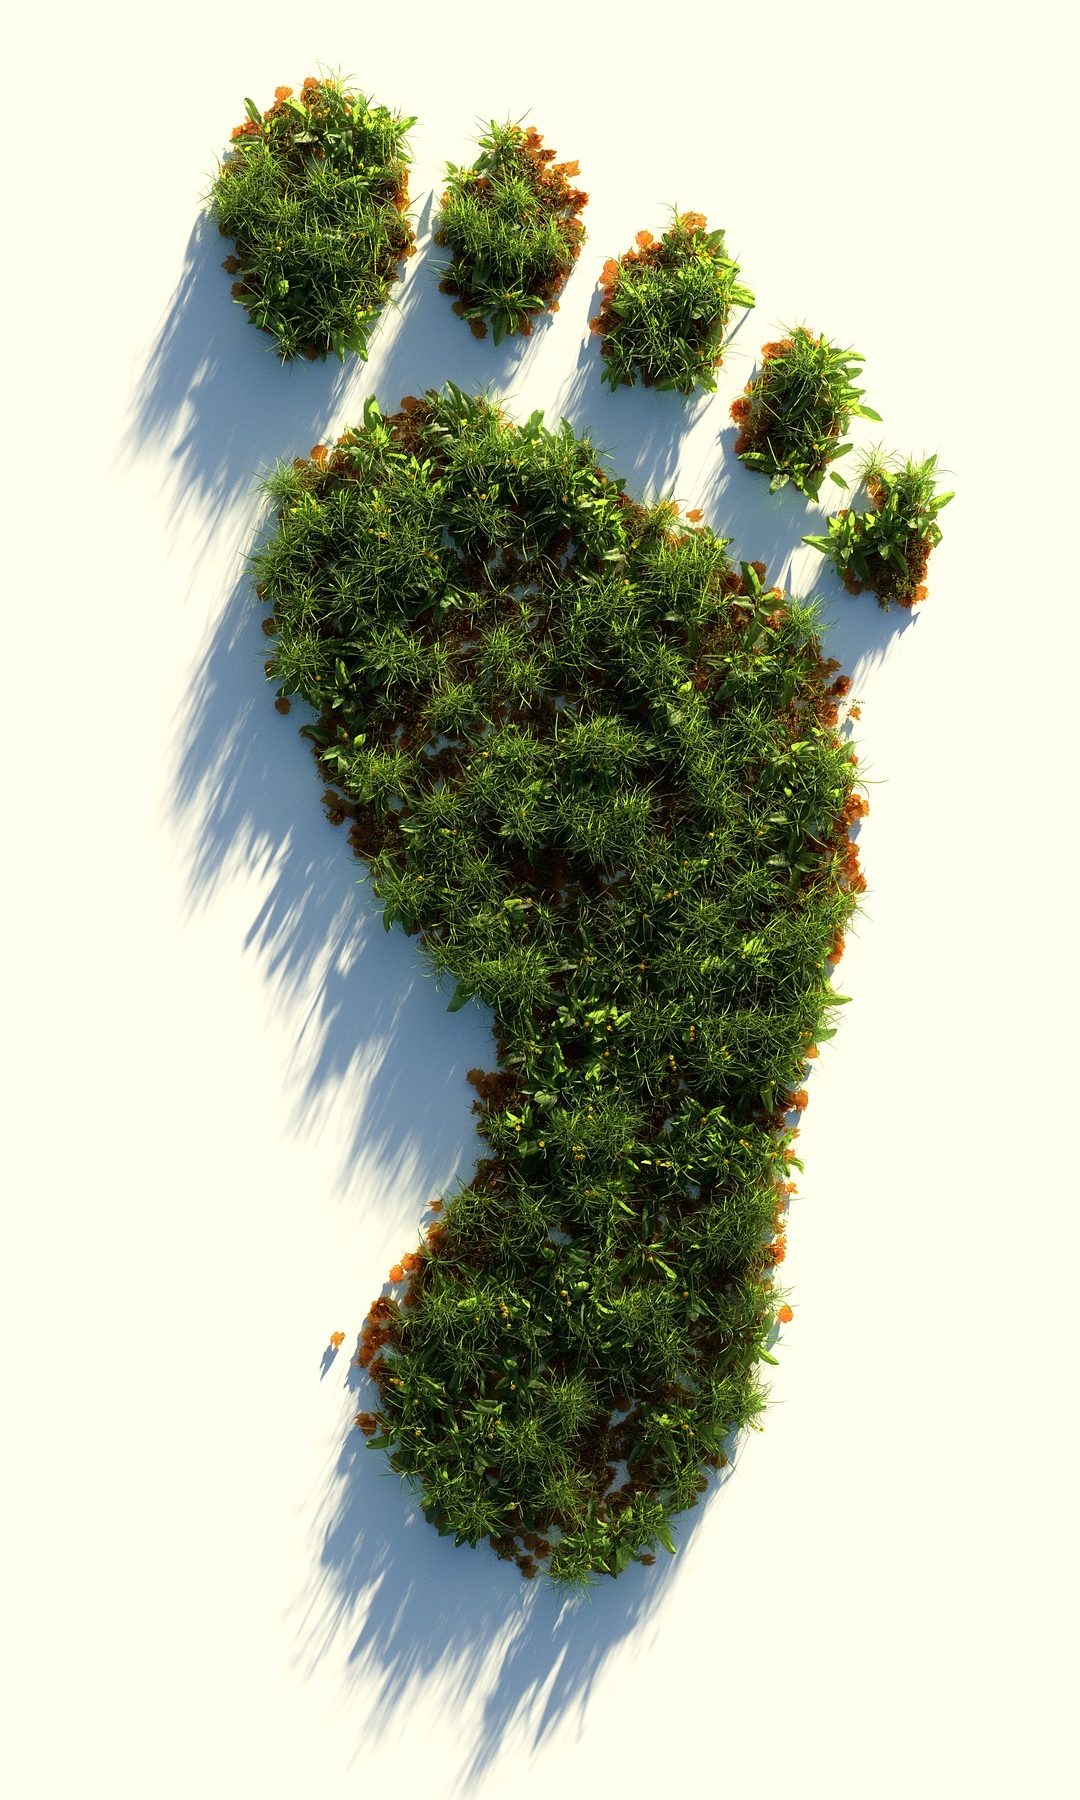 Footprint made of green bushes representing the ecological footprint